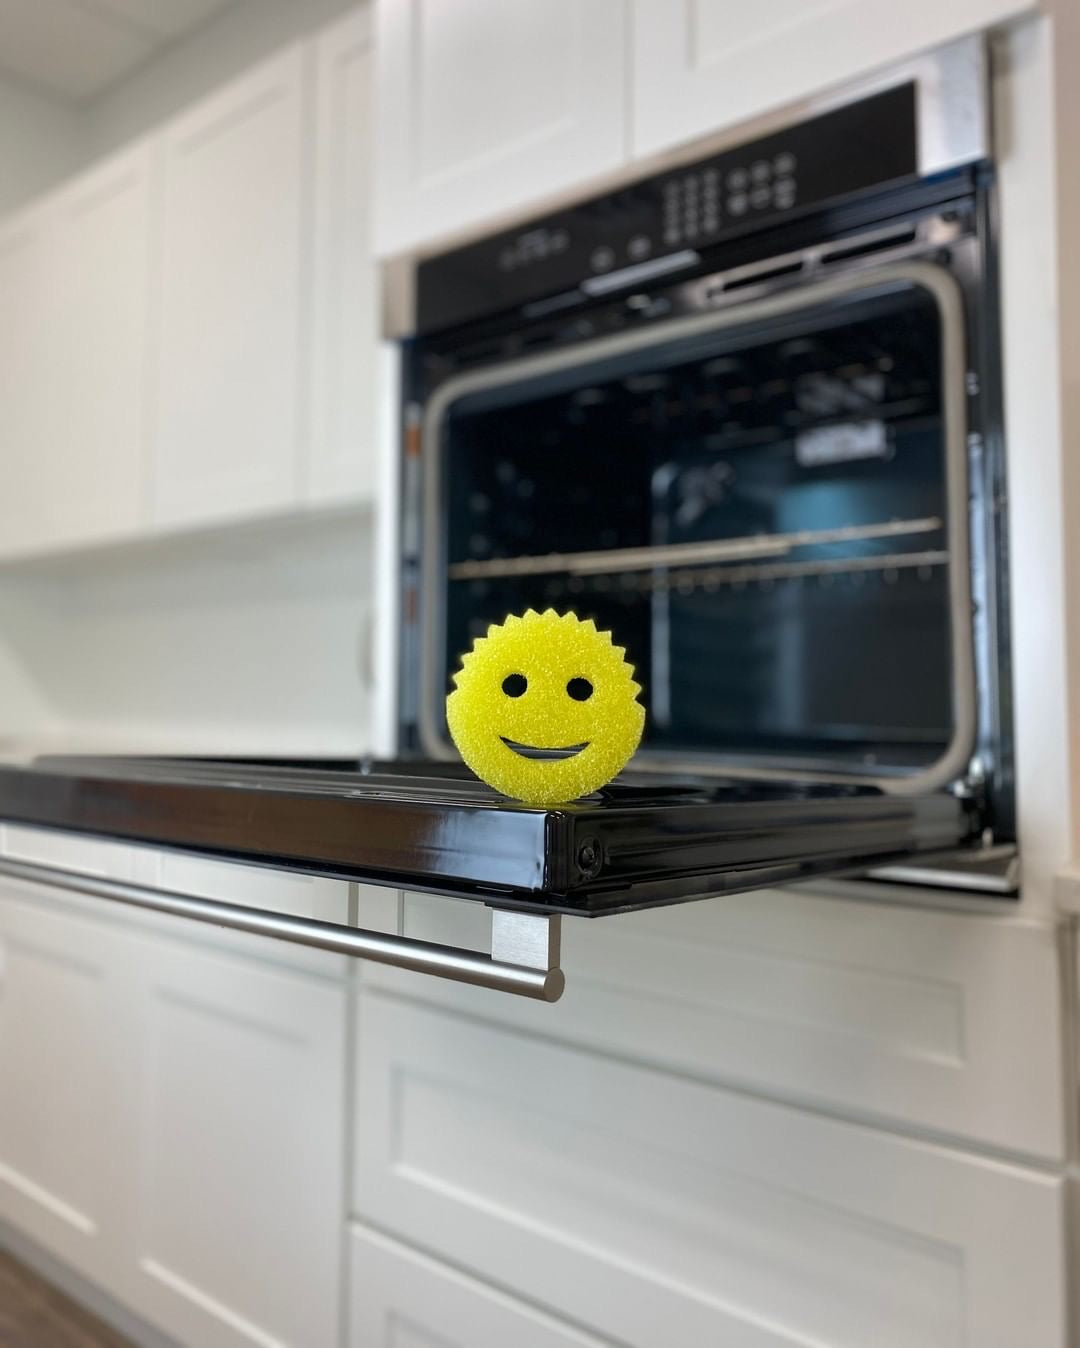 Scrub Daddy Family (6 Pack) – CleanPost NZ